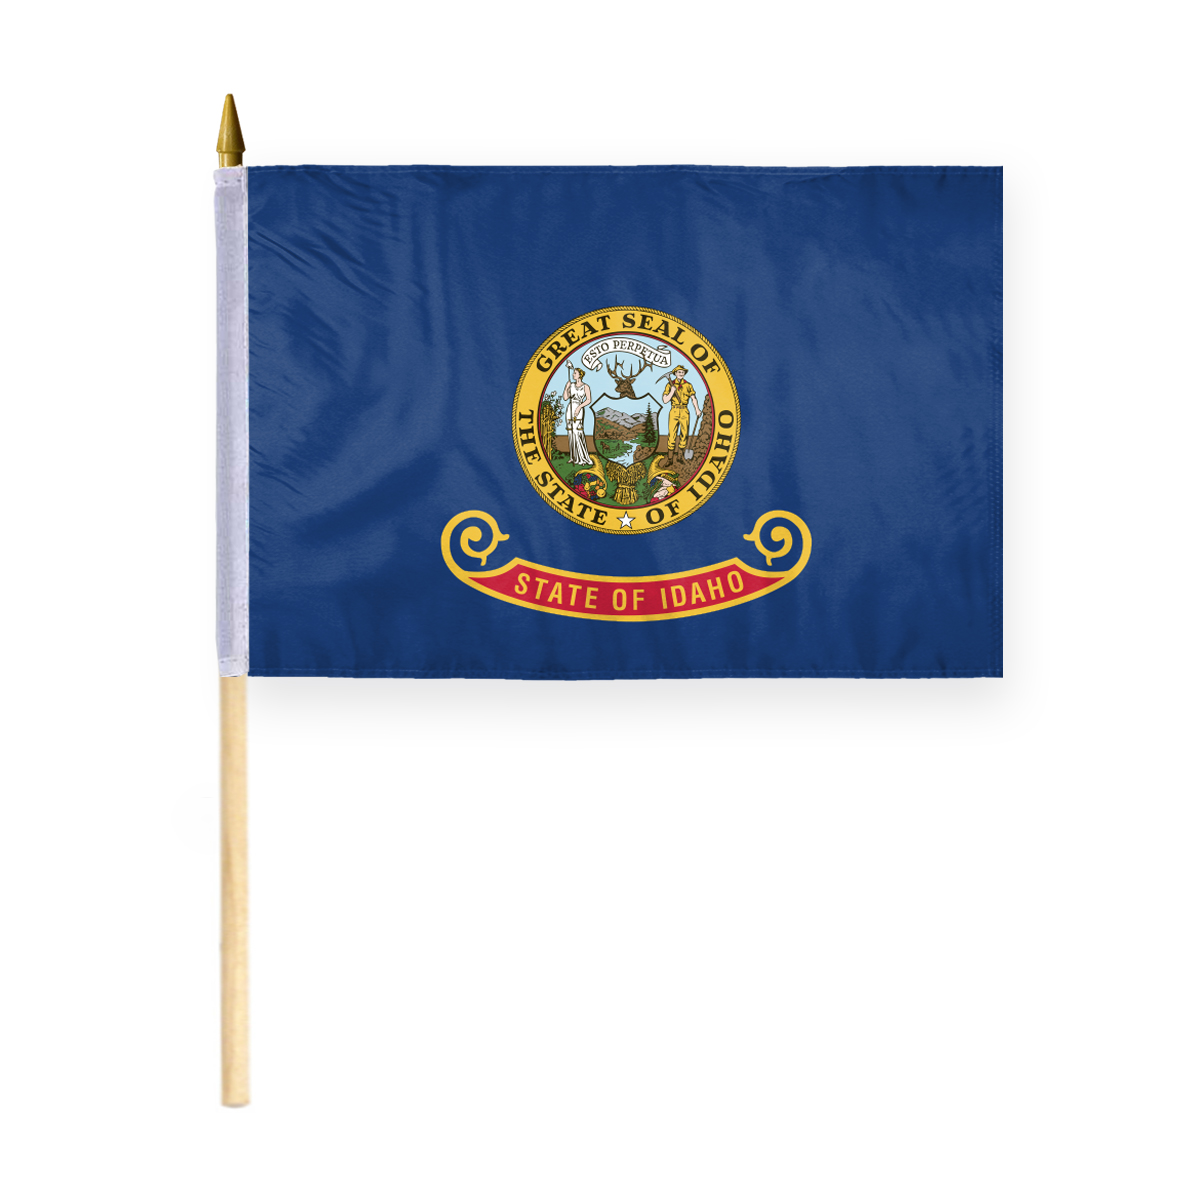 AGAS Idaho Stick Flag 12x18 Inch with 24 inch Wood Pole - Printed Polyester - State of Idaho Handheld Desk Flag Small Idaho Flag